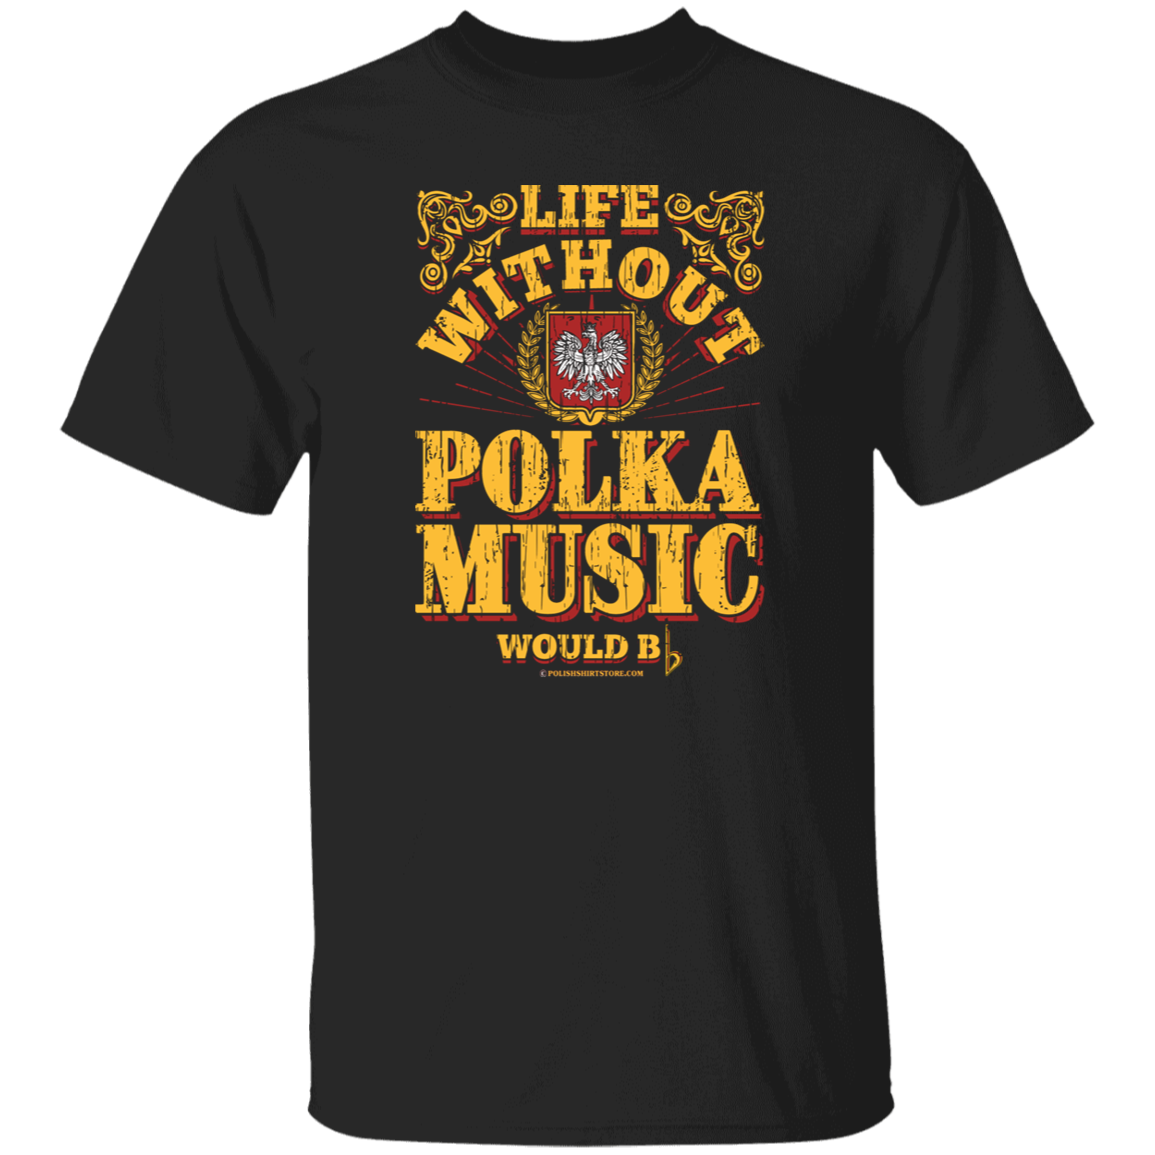 Life Without Polka Music Would Bb (Be Flat) Apparel CustomCat G500 5.3 oz. T-Shirt Black S